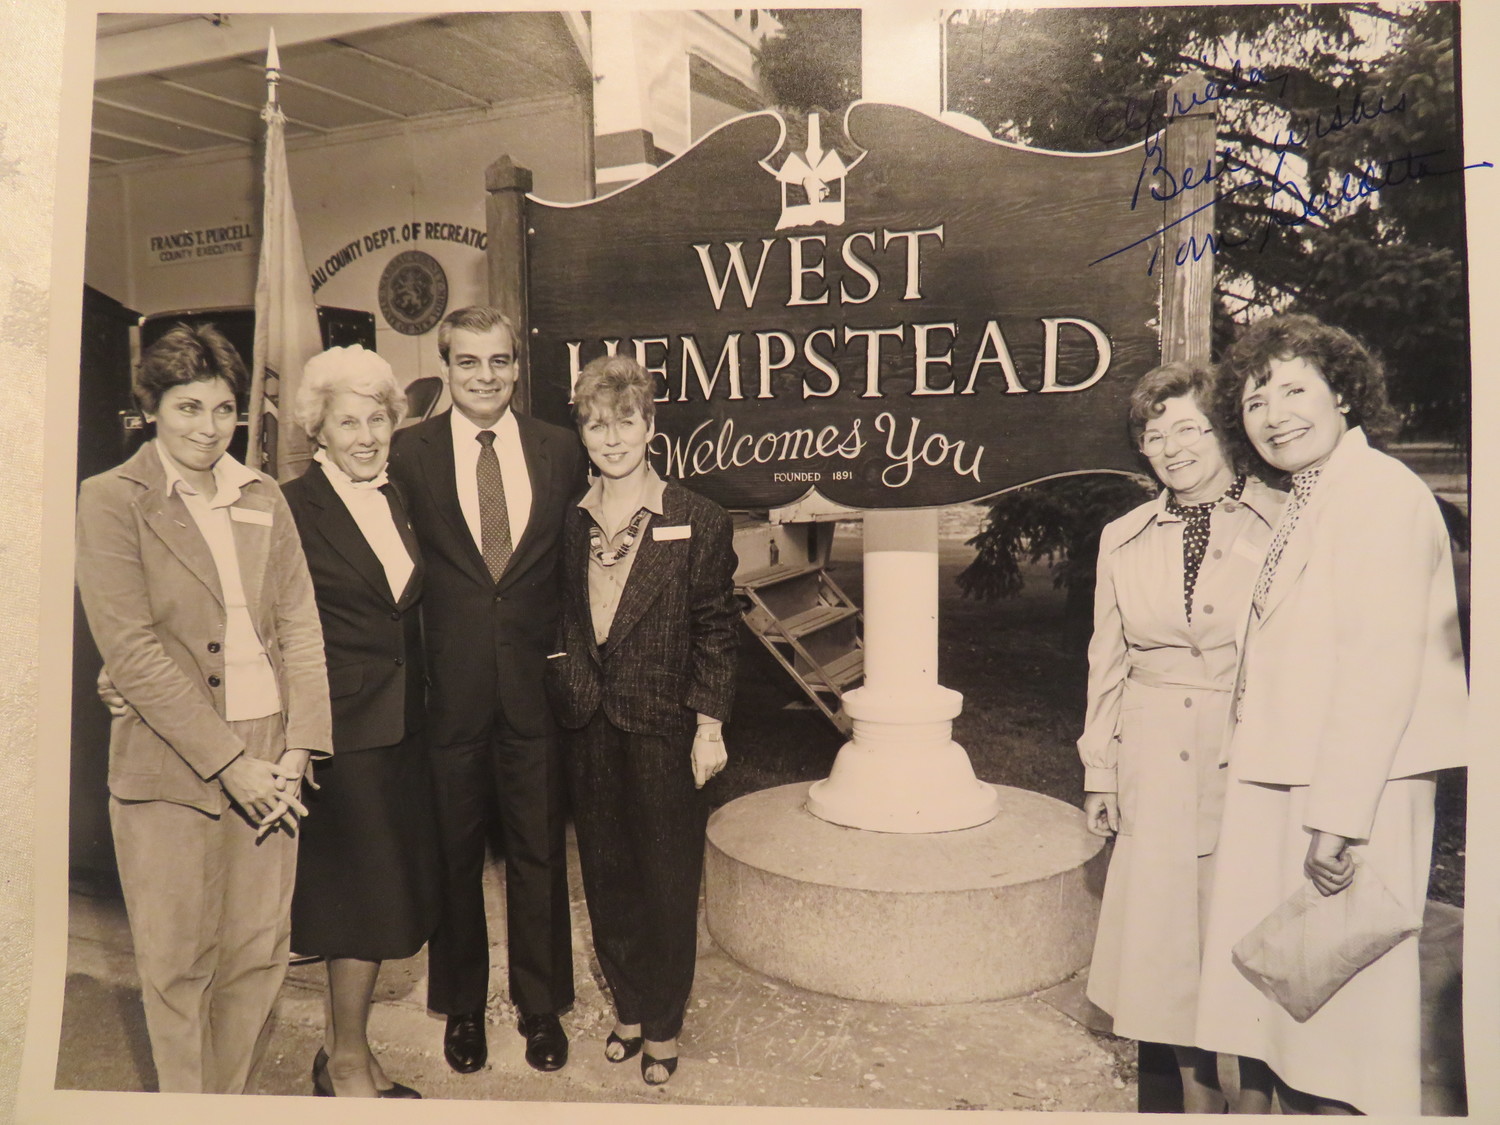 West Hempstead’s newly installed welcome sign at Hall’s Pond Park in 1985.